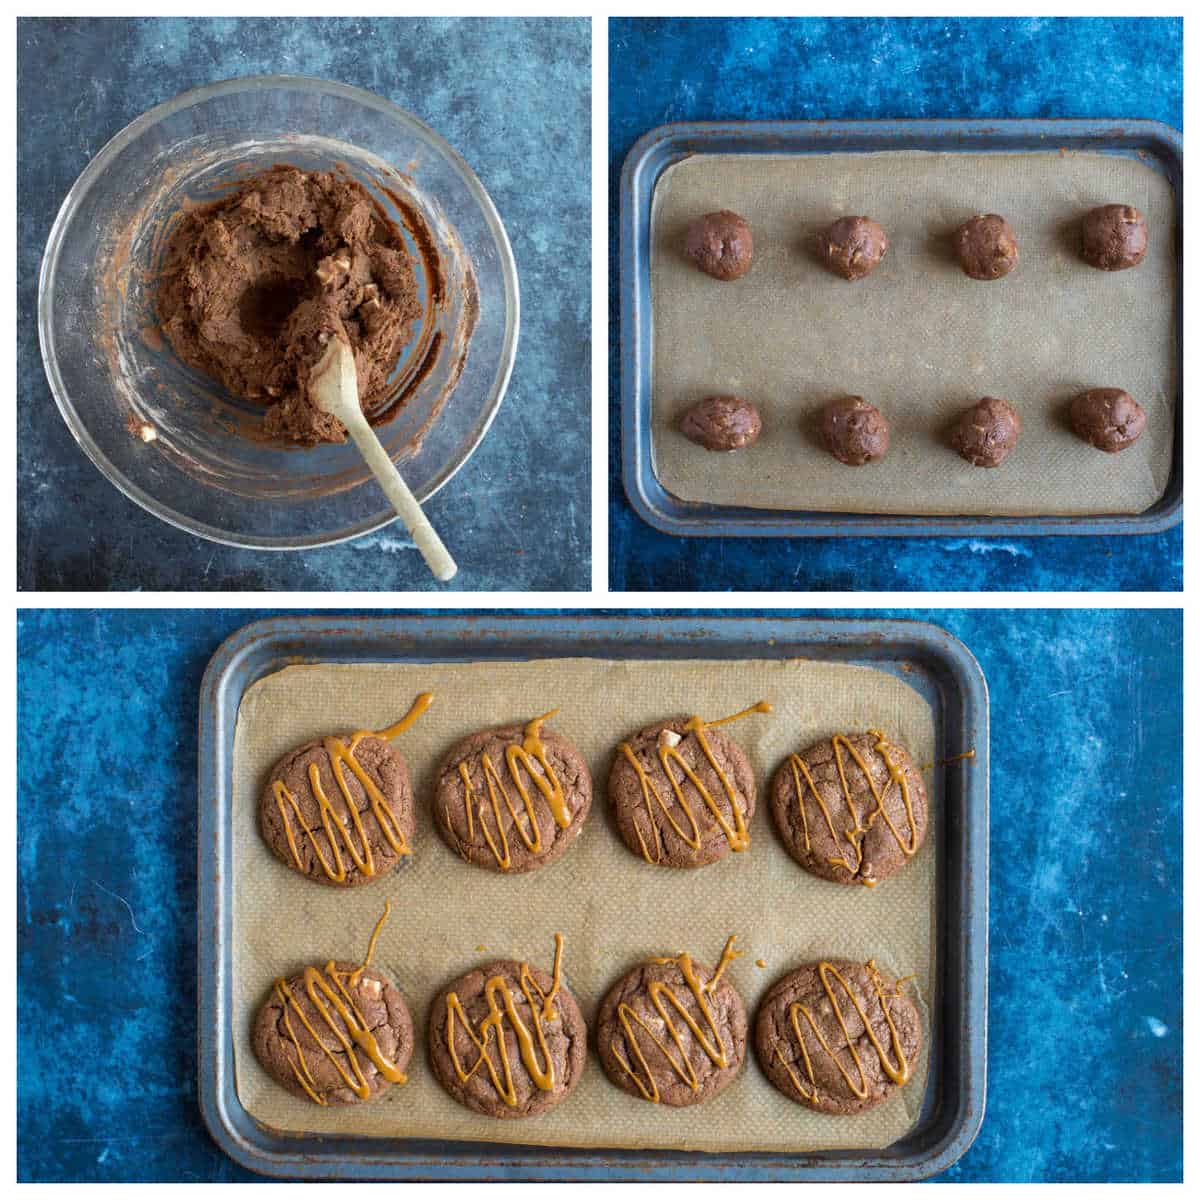 Biscoff cookies baked in the oven.